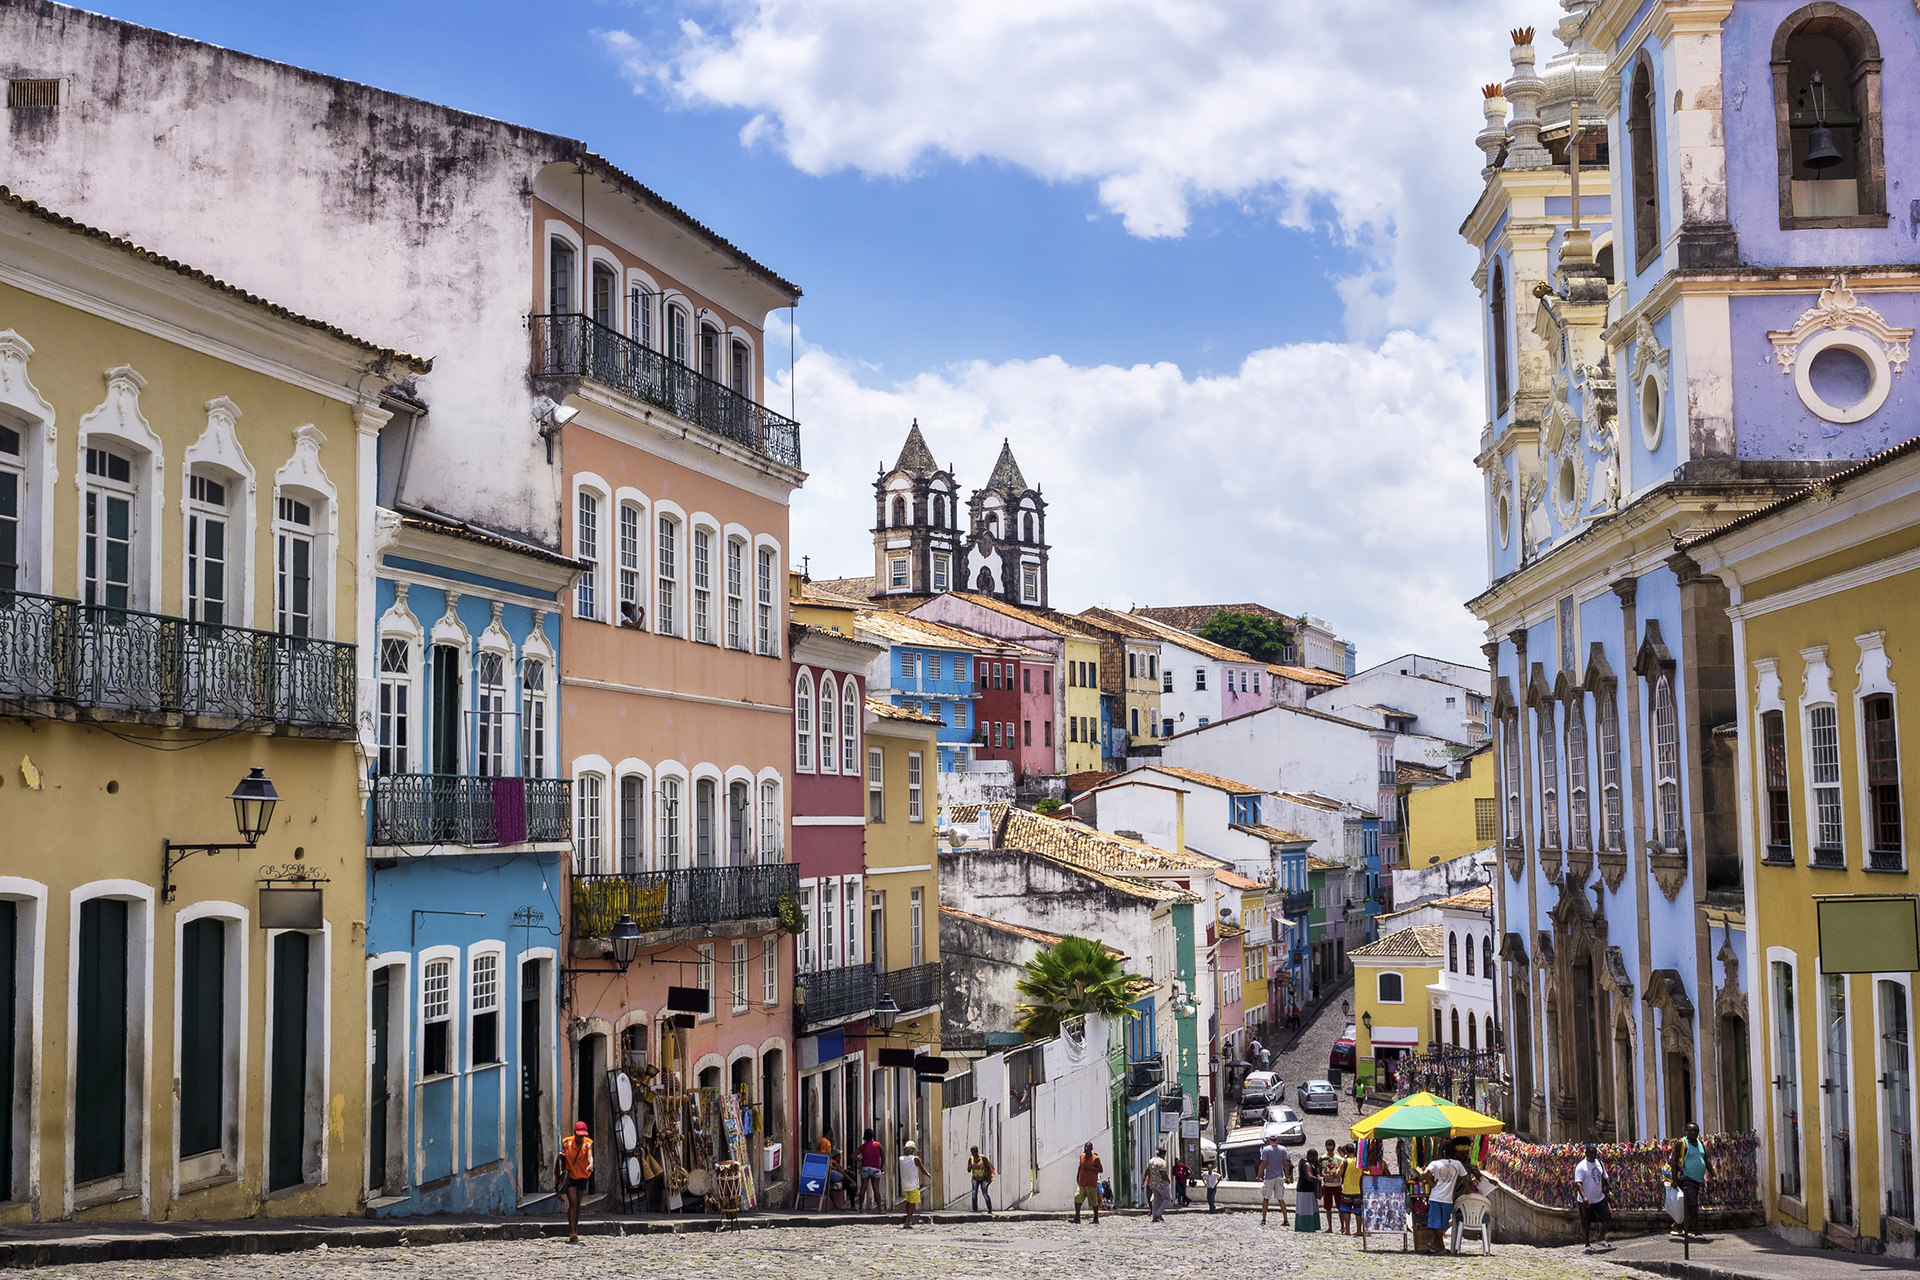 Salvador da Bahia, Brazil - April 2, 2015: View of the colorful colonial houses at the historic district of Pelourinho in Salvador da Bahia, Brazil.